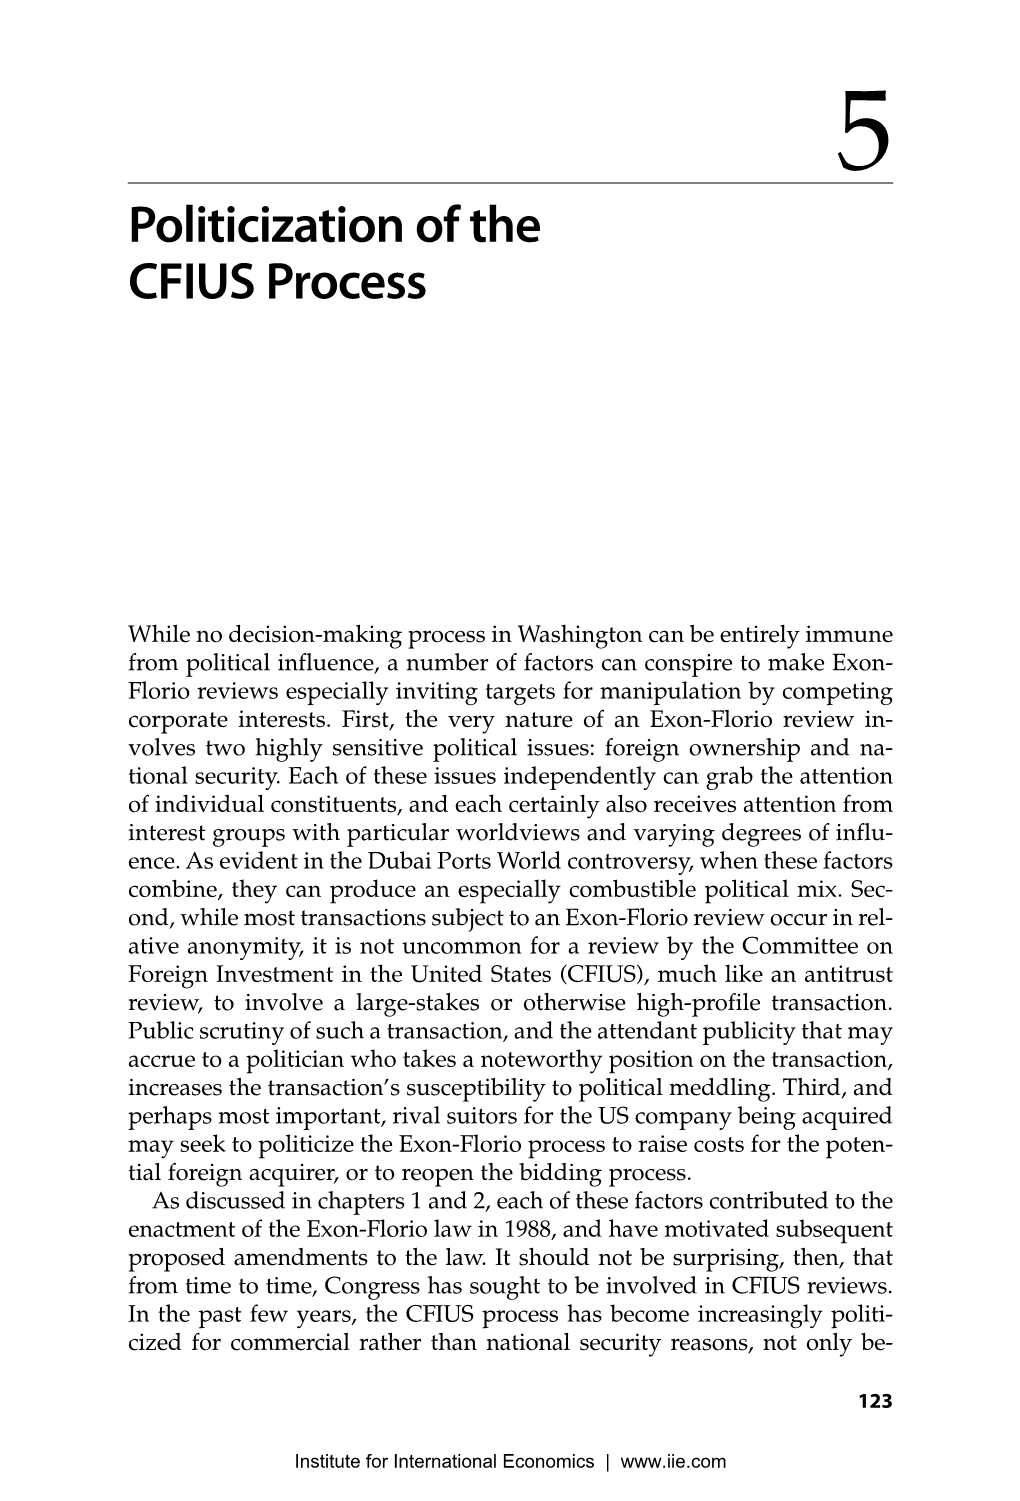 US National Security and Foreign Direct Investment Preview Chapter 5: Politicization of the CFIUS Process